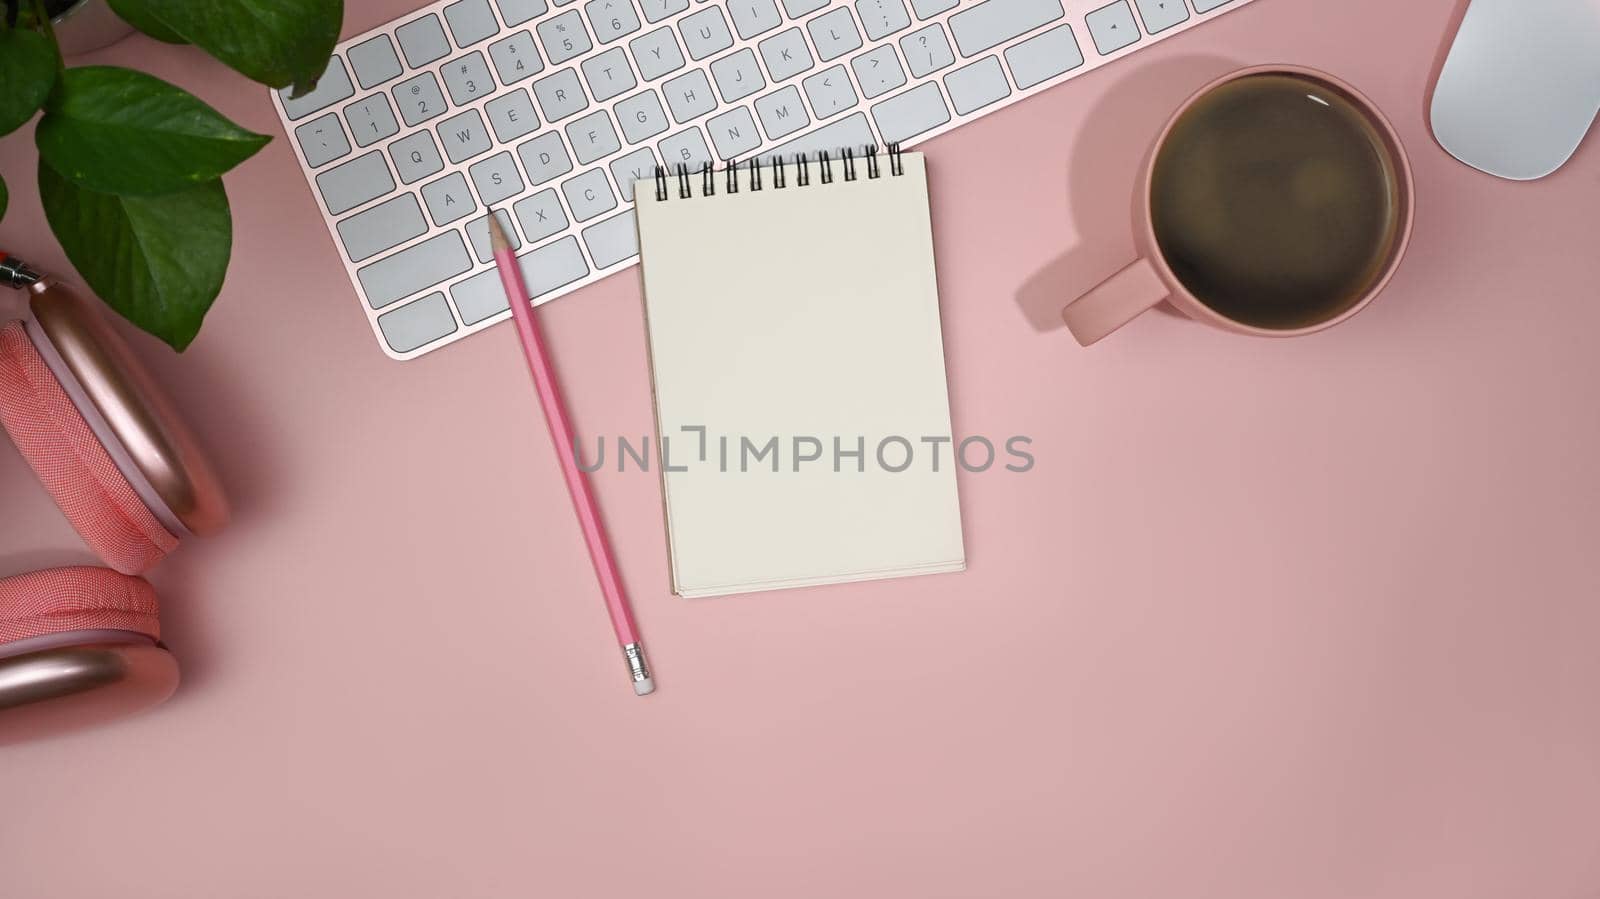 Flat lay blank notebook, wireless headphone and coffee cup on pink background. Feminine workplace.